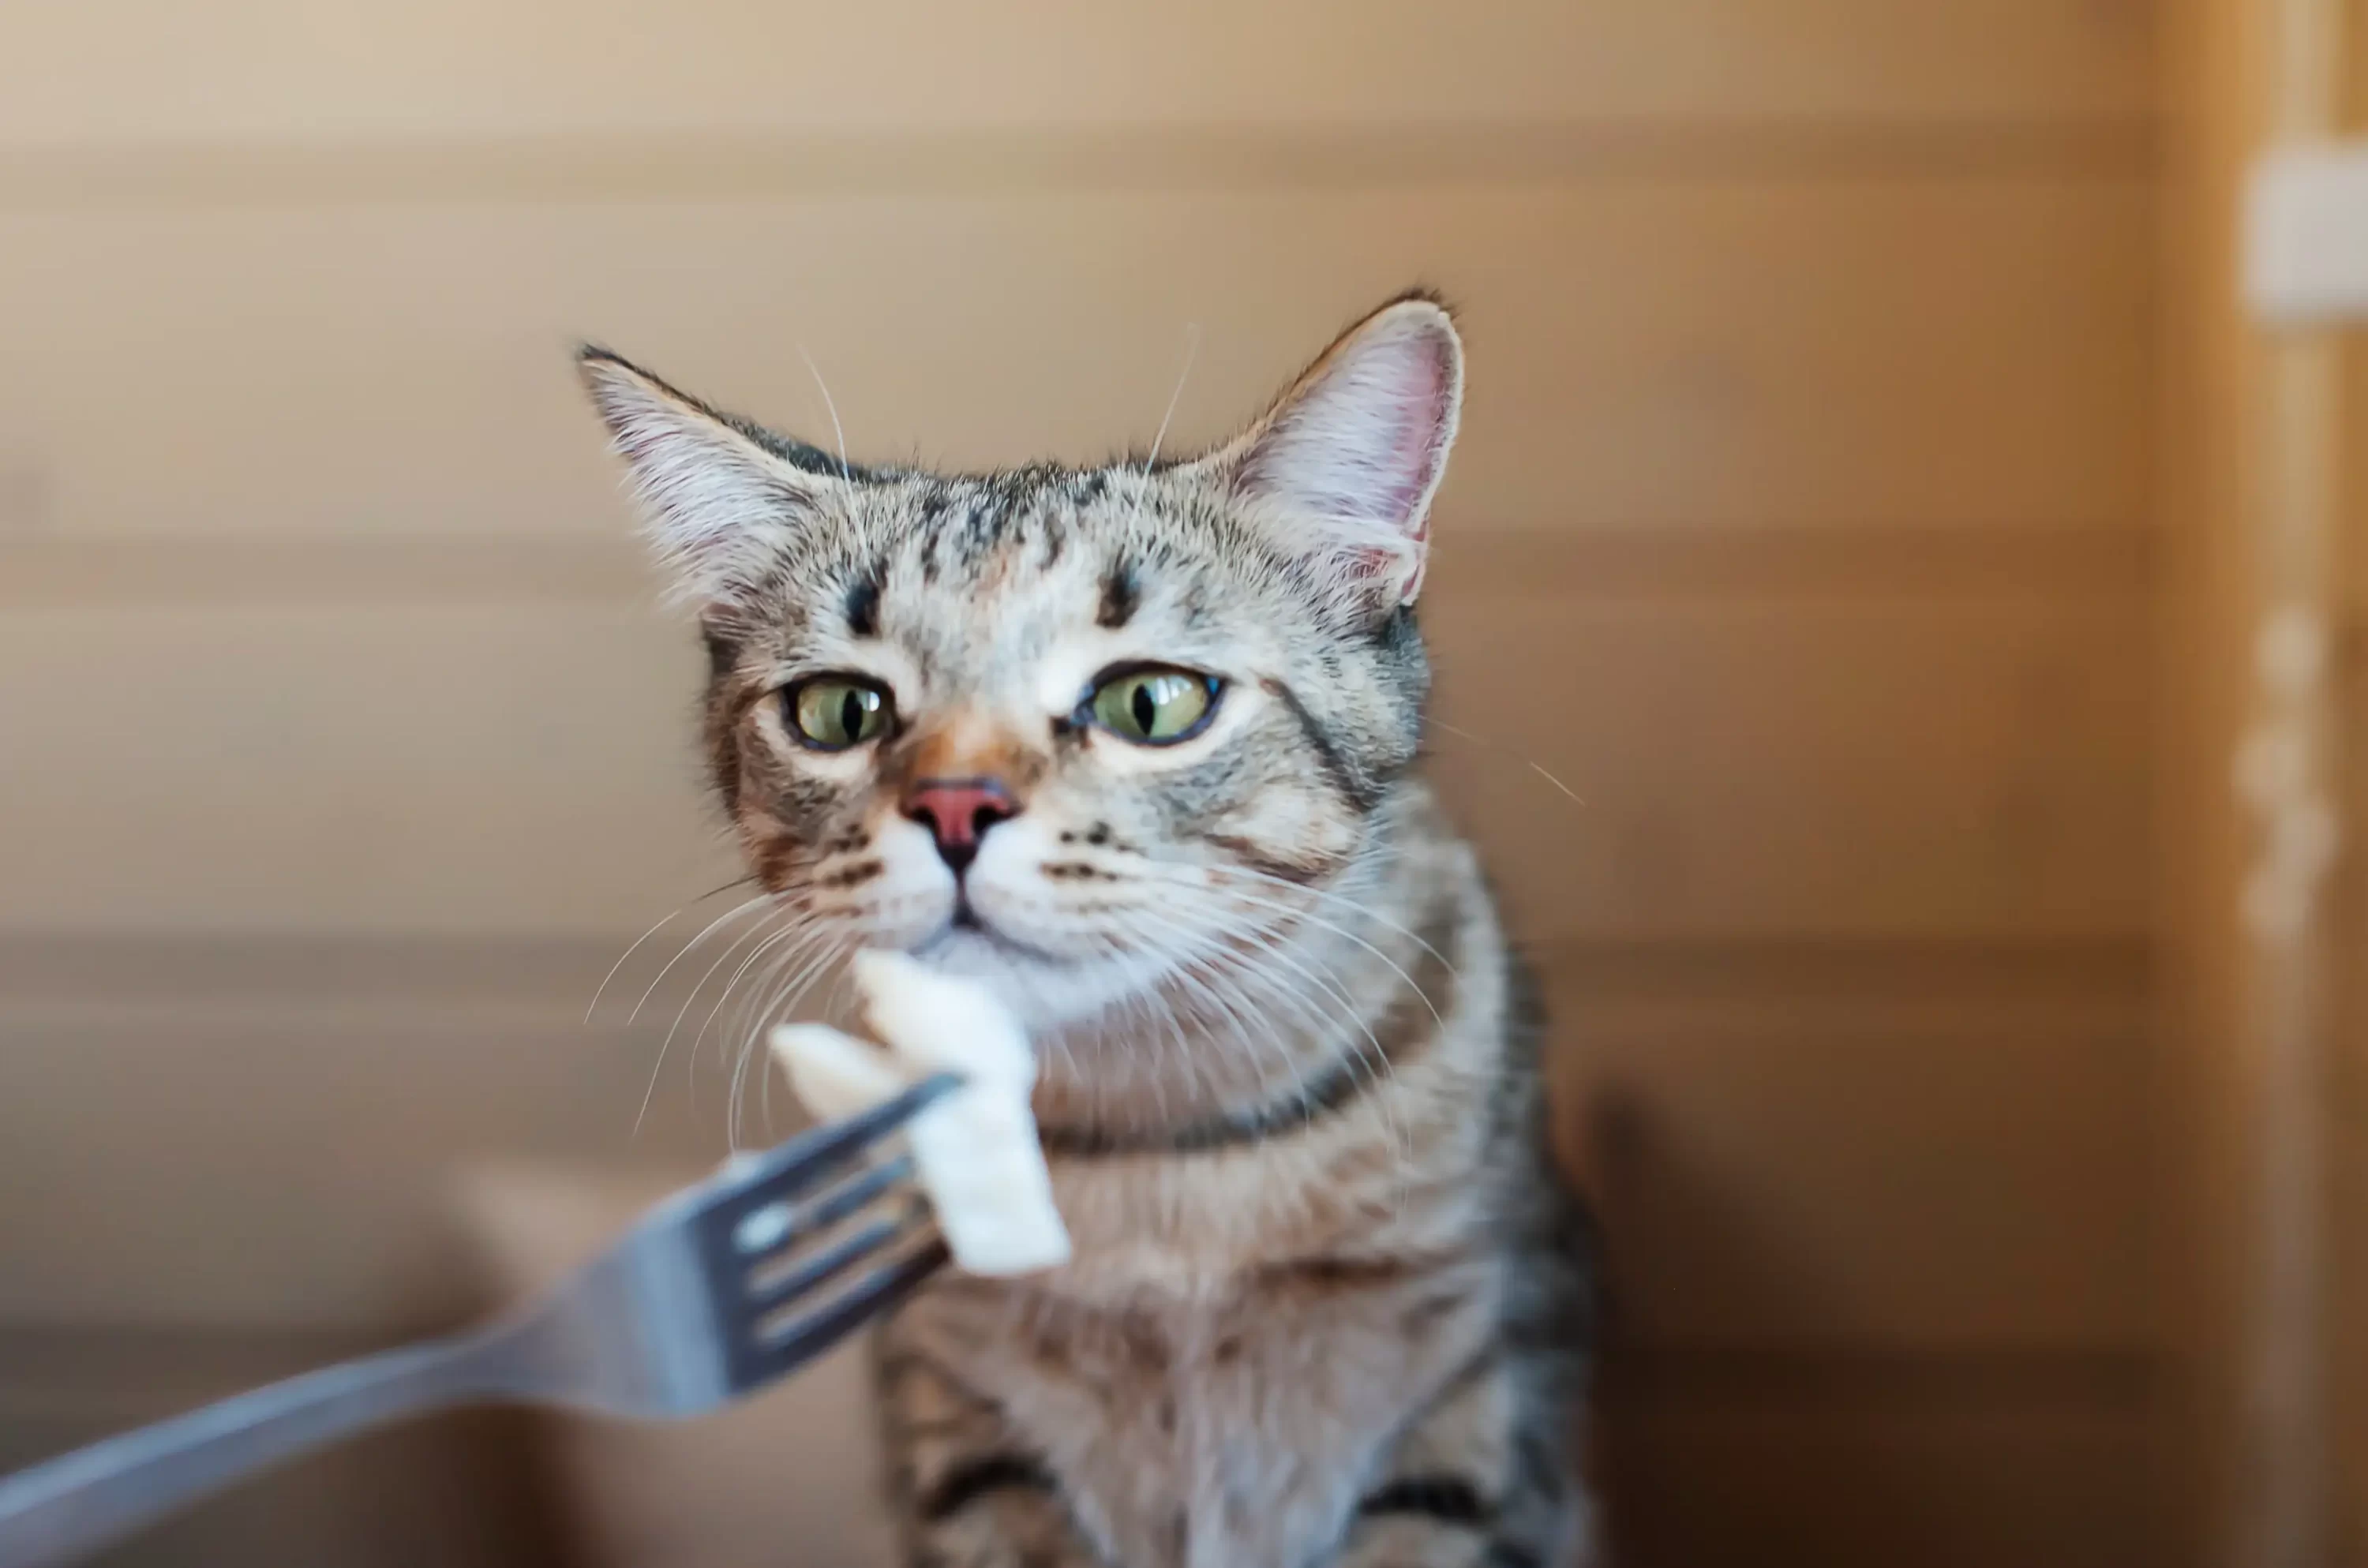 Dog eating food from fork. Salmon cat food ingredient